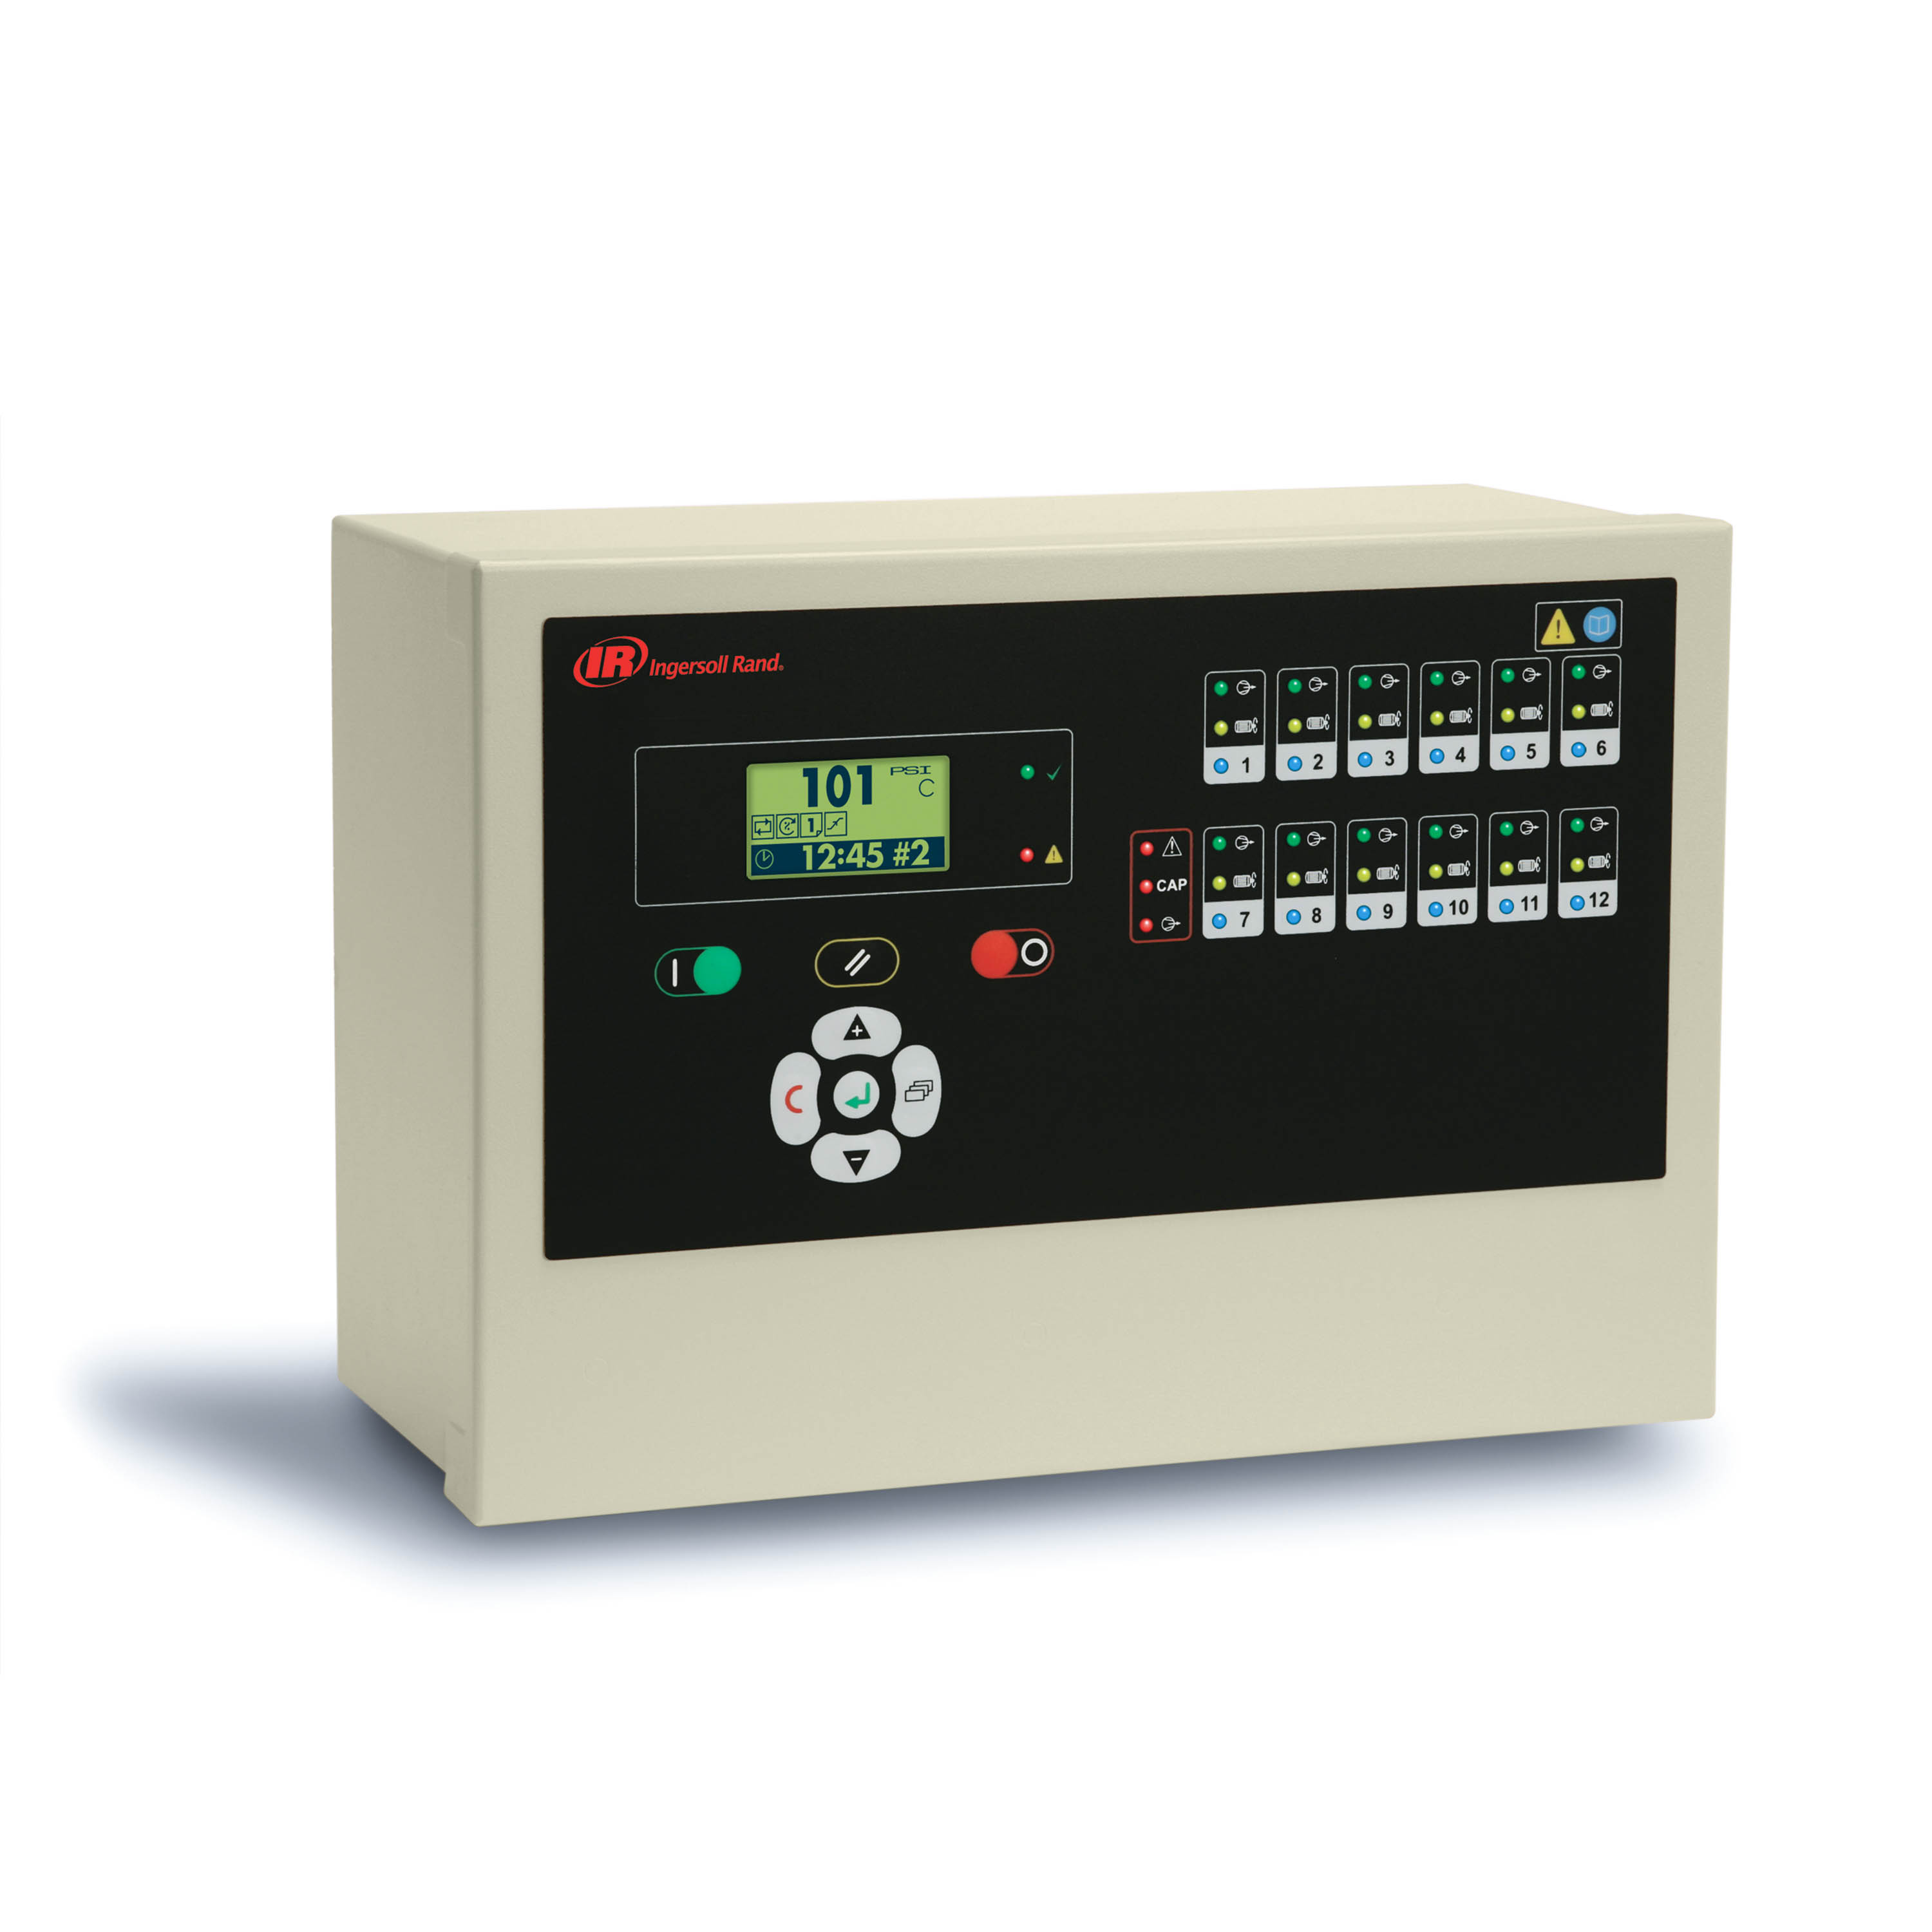 Control systems for compressors